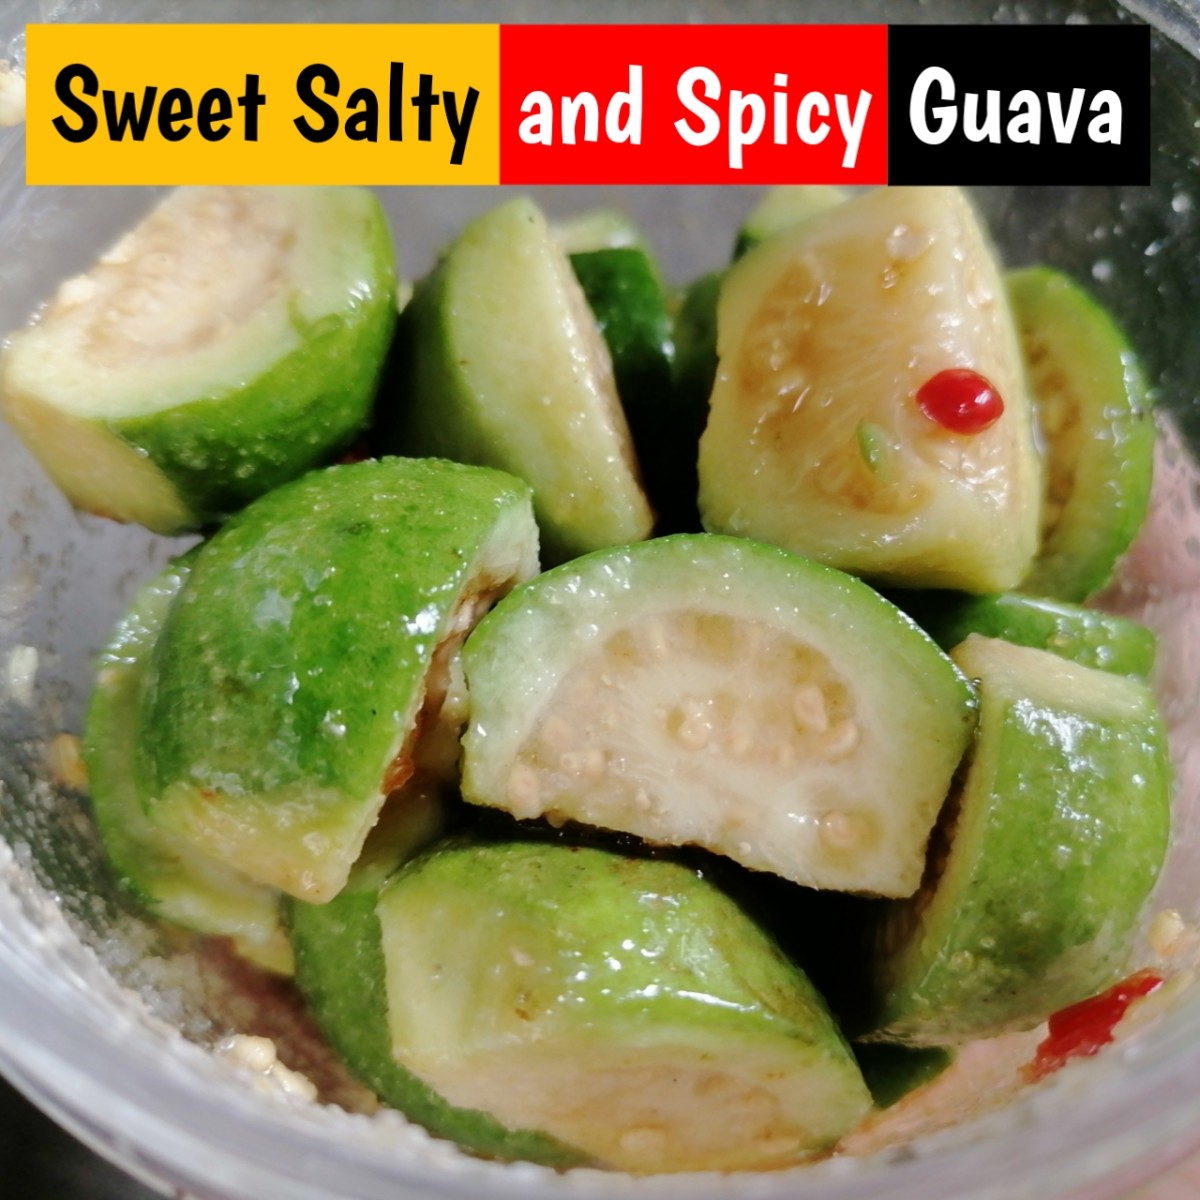 Sweet, Salty, and Spicy Guava (Bayabas)